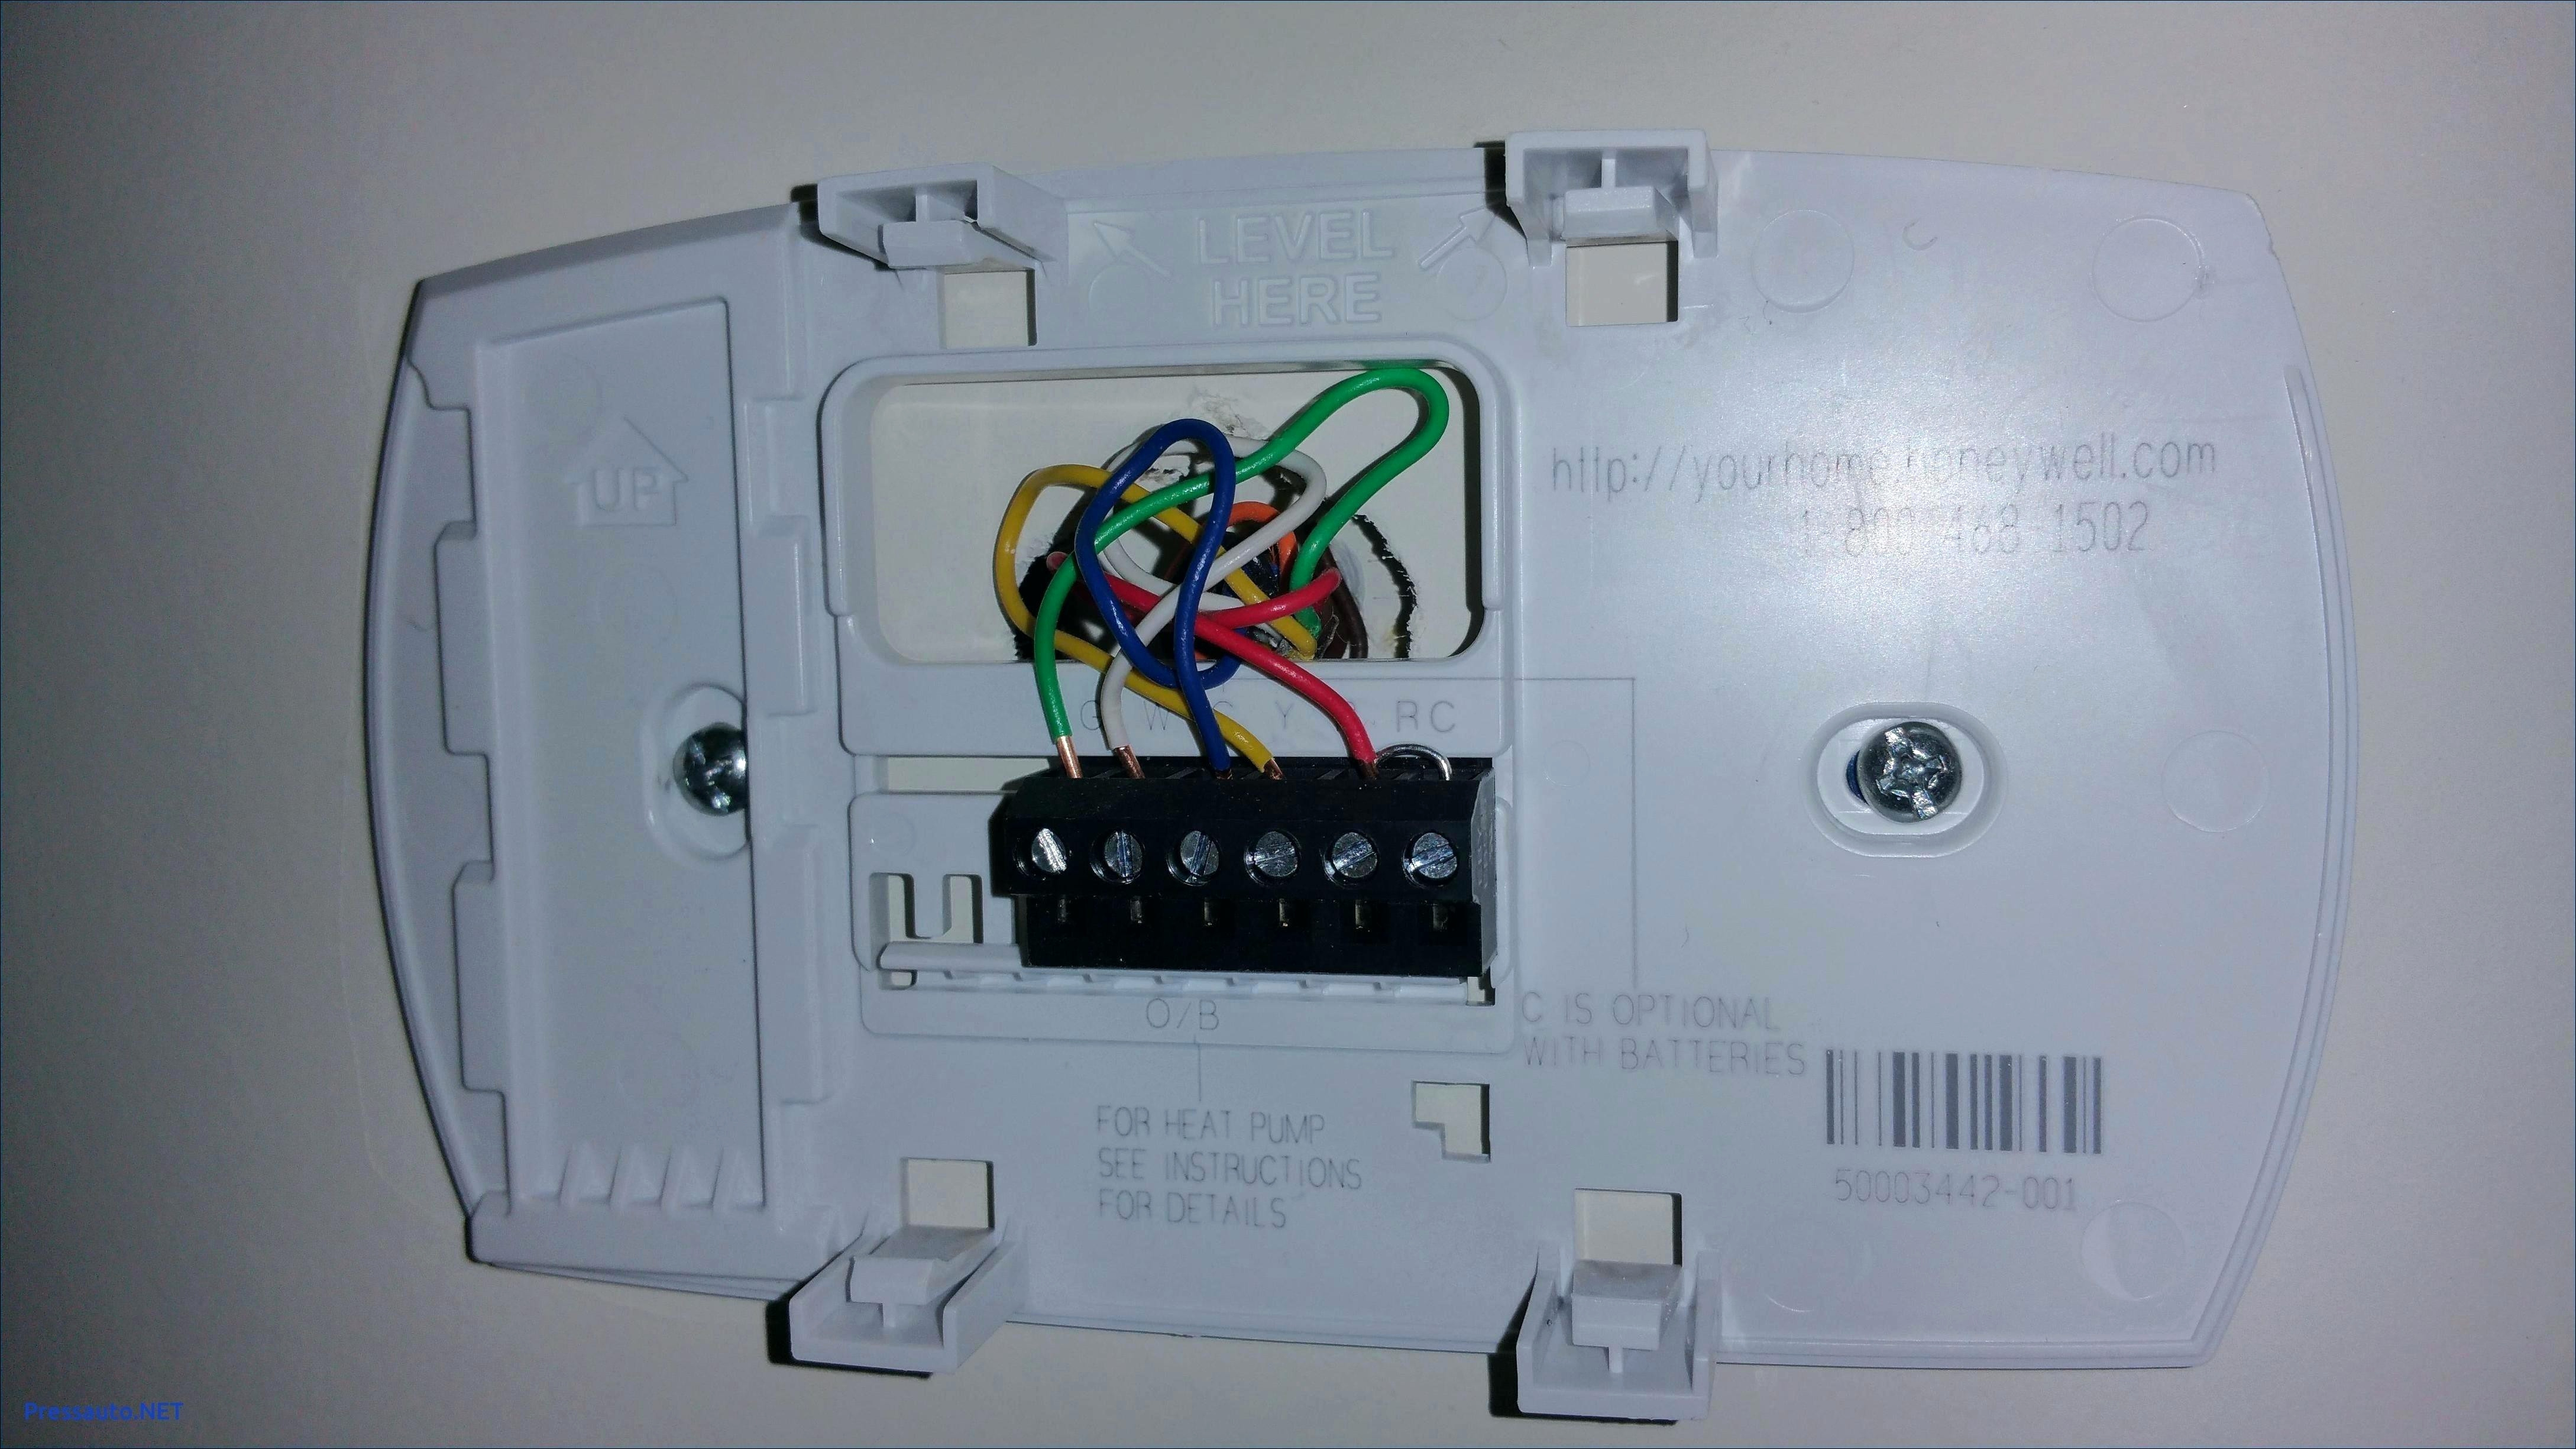 Dometic Single Zone Thermostat Wiring Diagram | Wiring Diagram - Dometic Thermostat Wiring Diagram